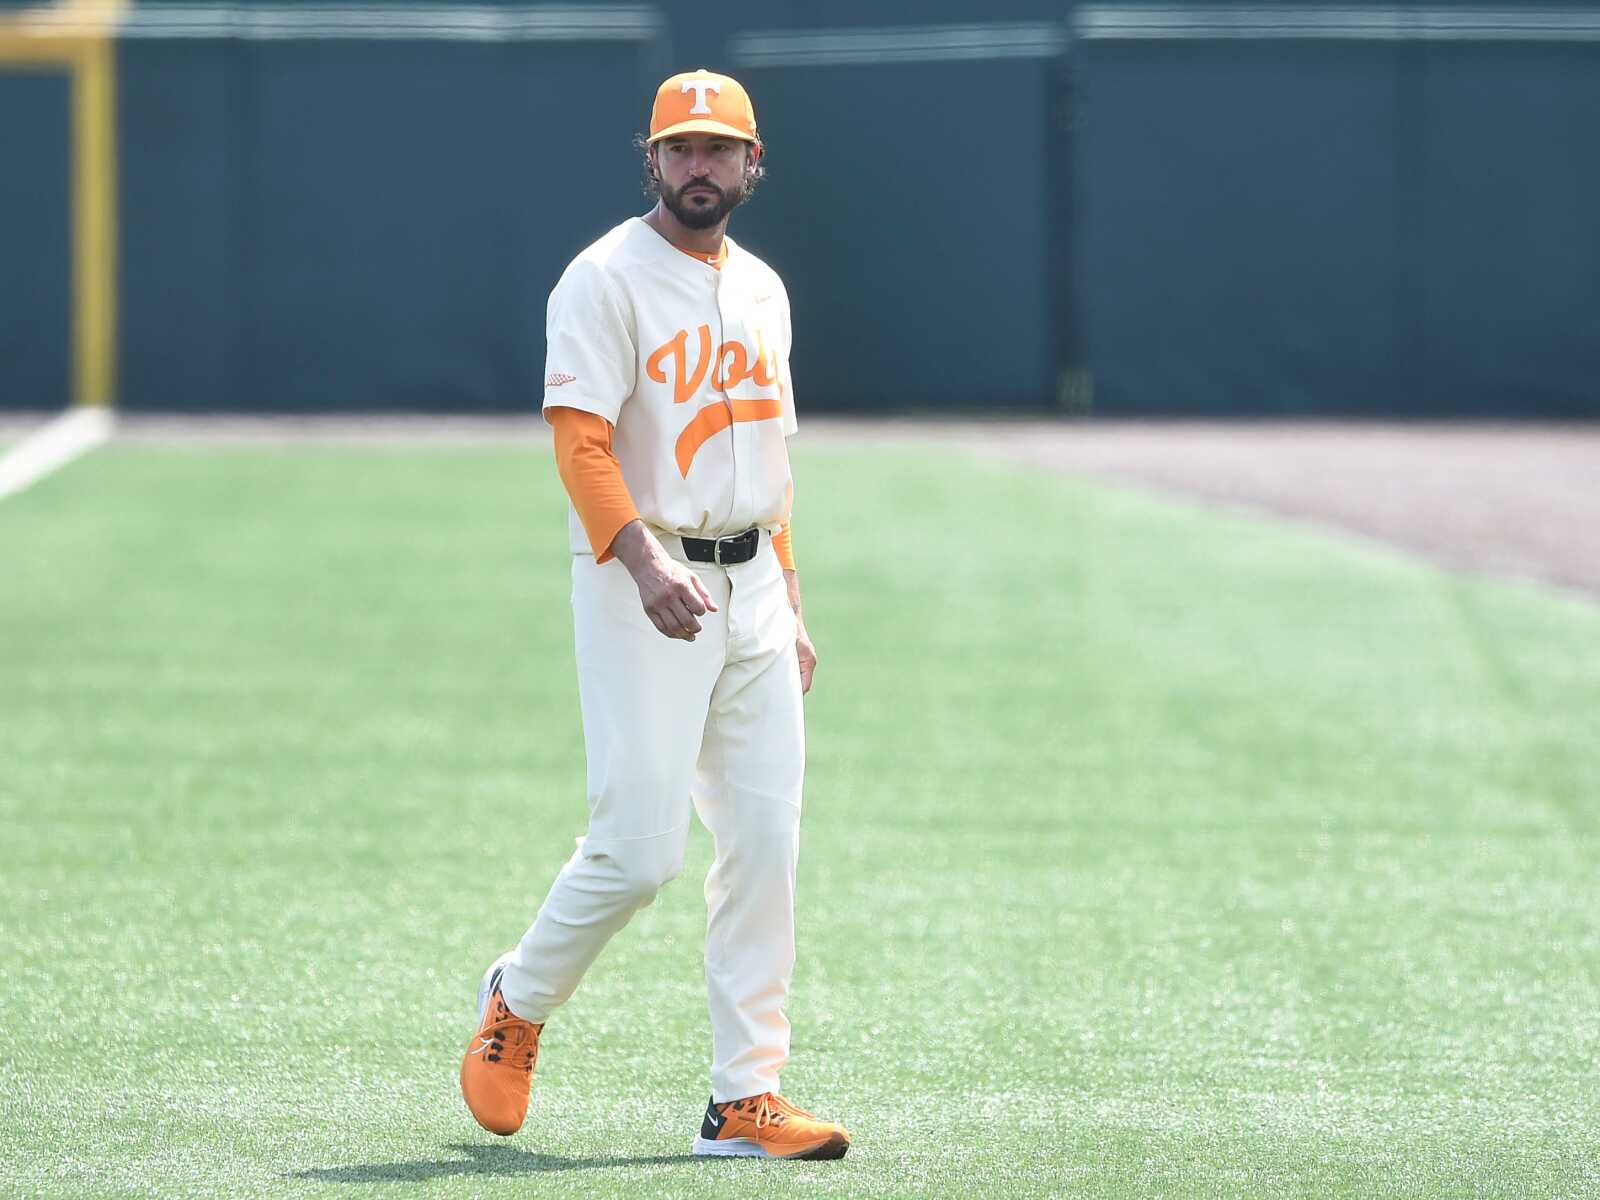 Tennessee baseball: Vols must own national ridicule after Super Regional